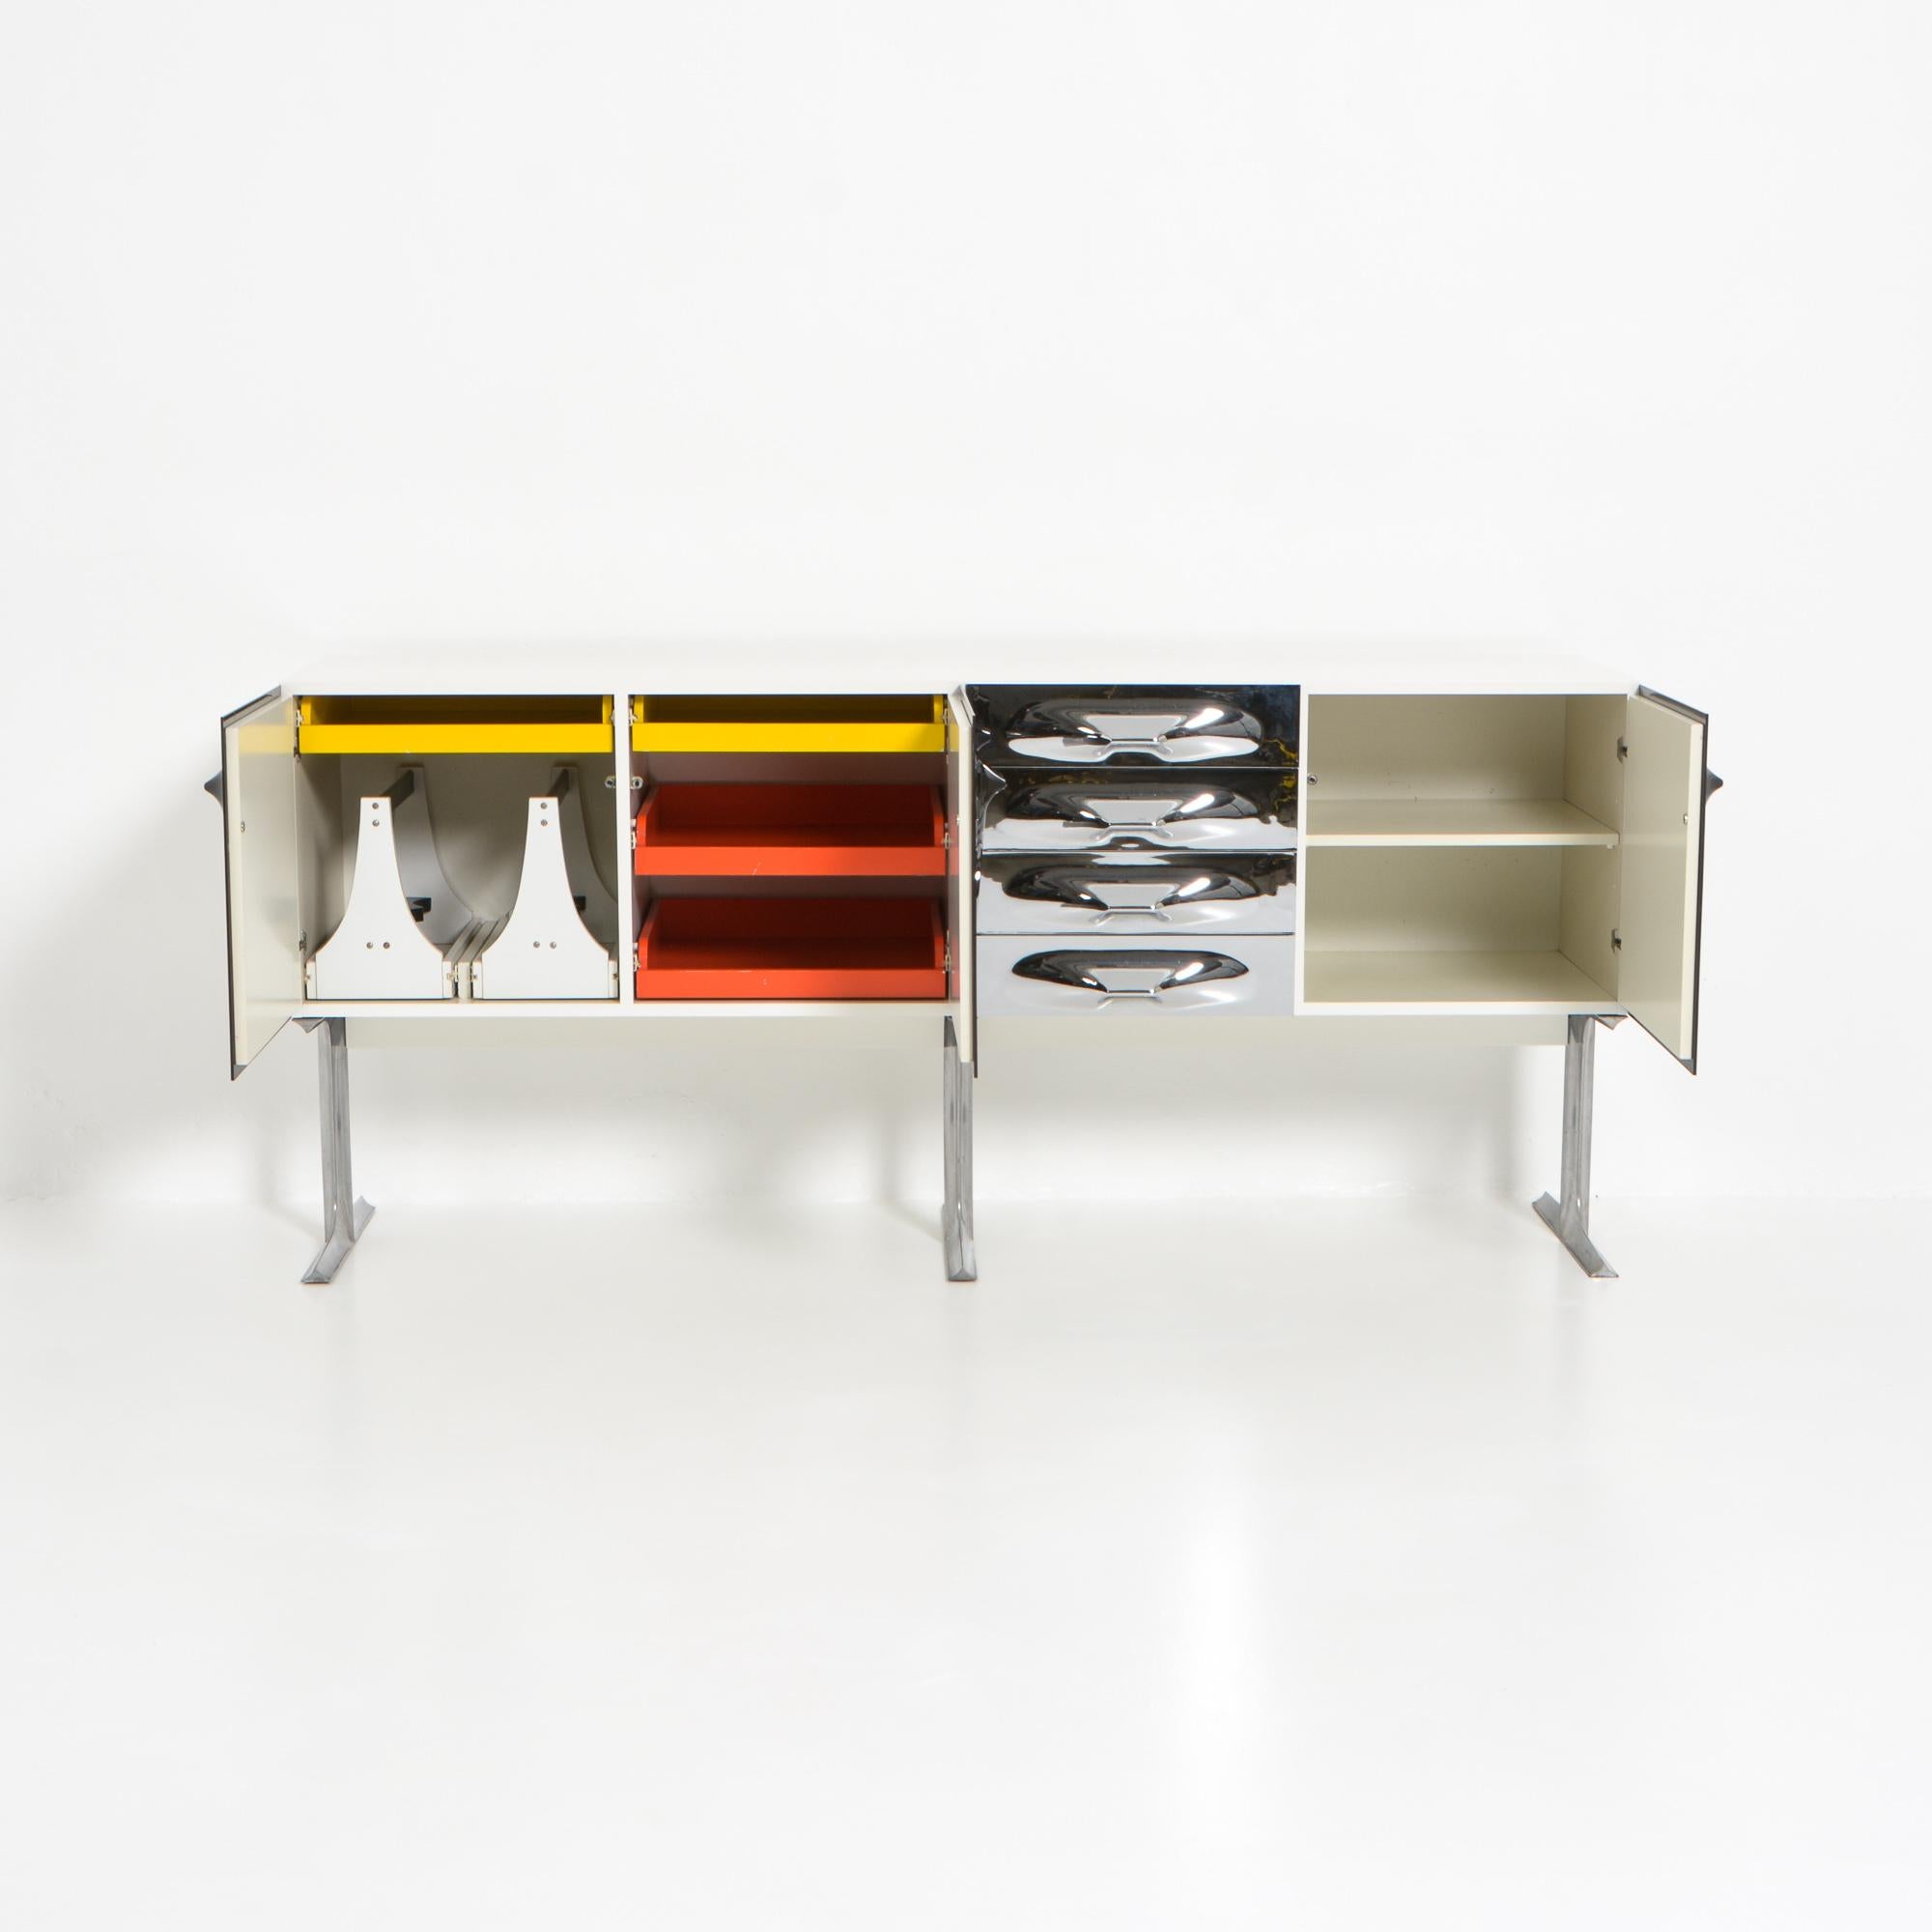 This exclusive and rare sideboard was designed by Raymond Loewy for Doubinsky Frères 2000 in France in the 1960s. This sideboard features 3 ABS plastic dark brown doors and 4 chromed ABS plastic drawers. The inside is very colorful with yellow and